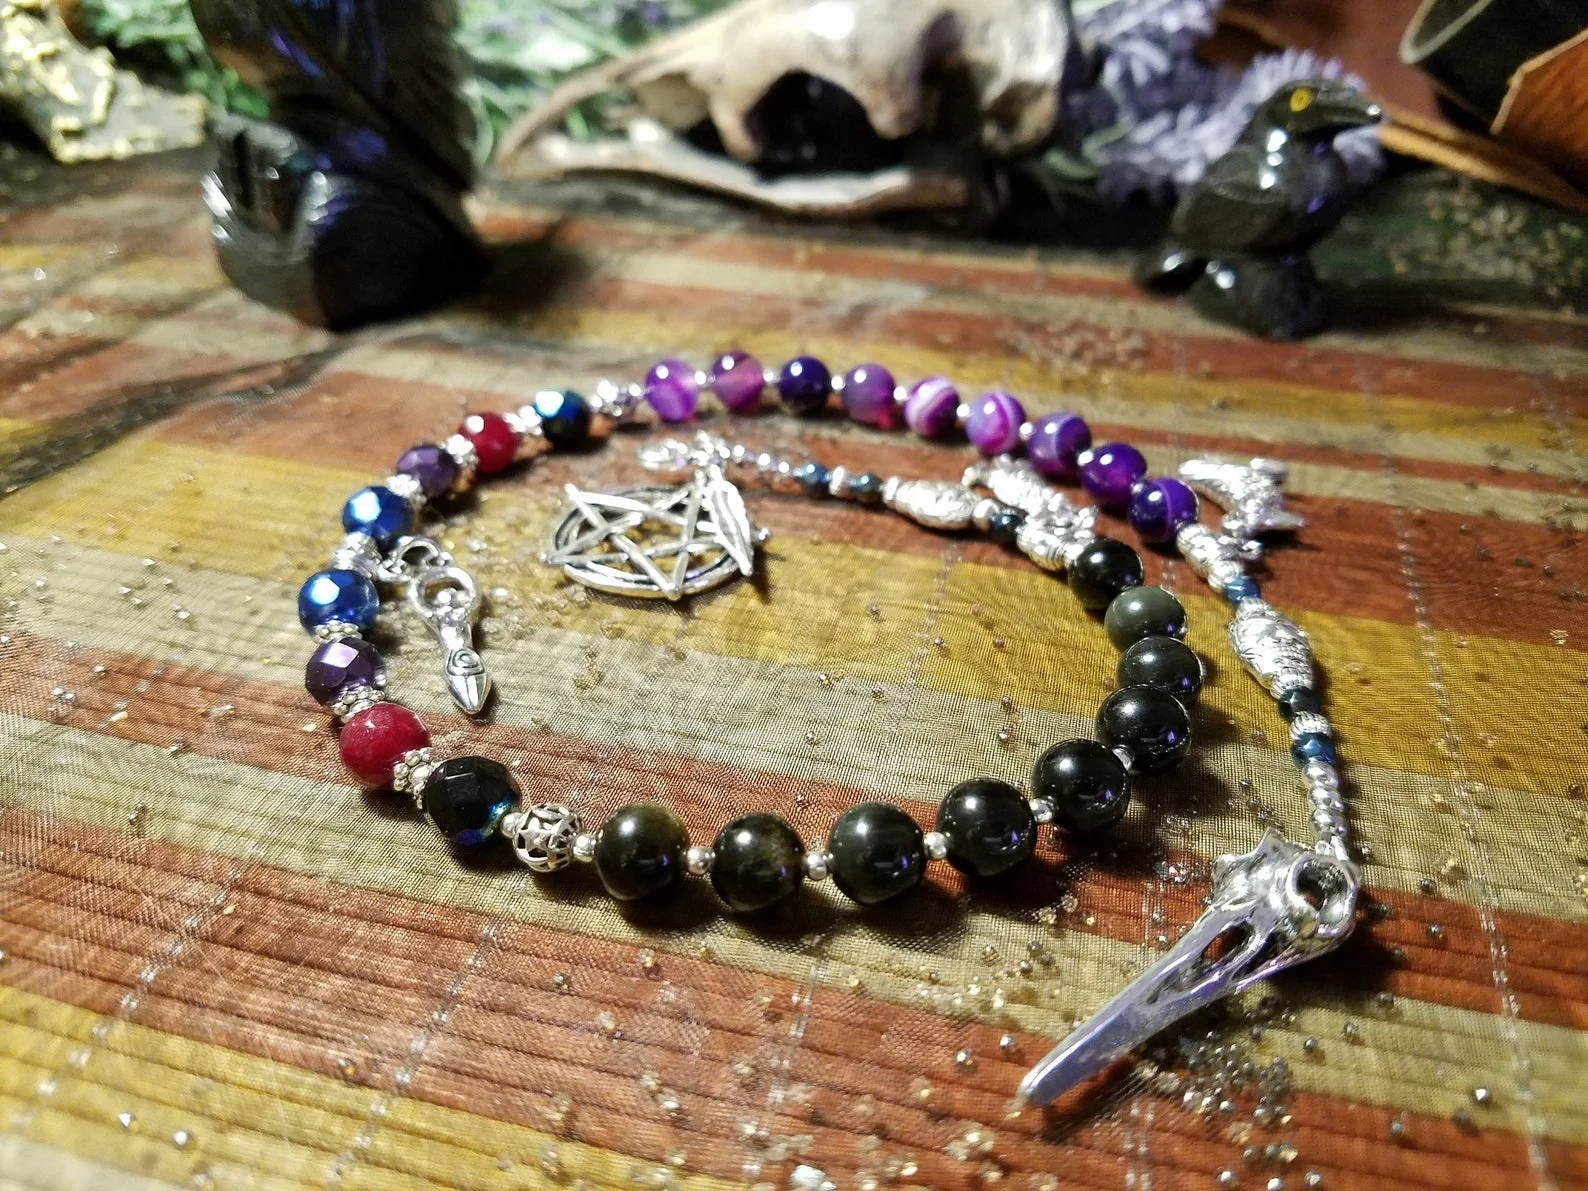 

Morrigan Pagan Prayer Beads, Lace Agate Mala Beads, Worry Beads, Raven Crow Witches' Ladder, Wiccan Meditation Beads